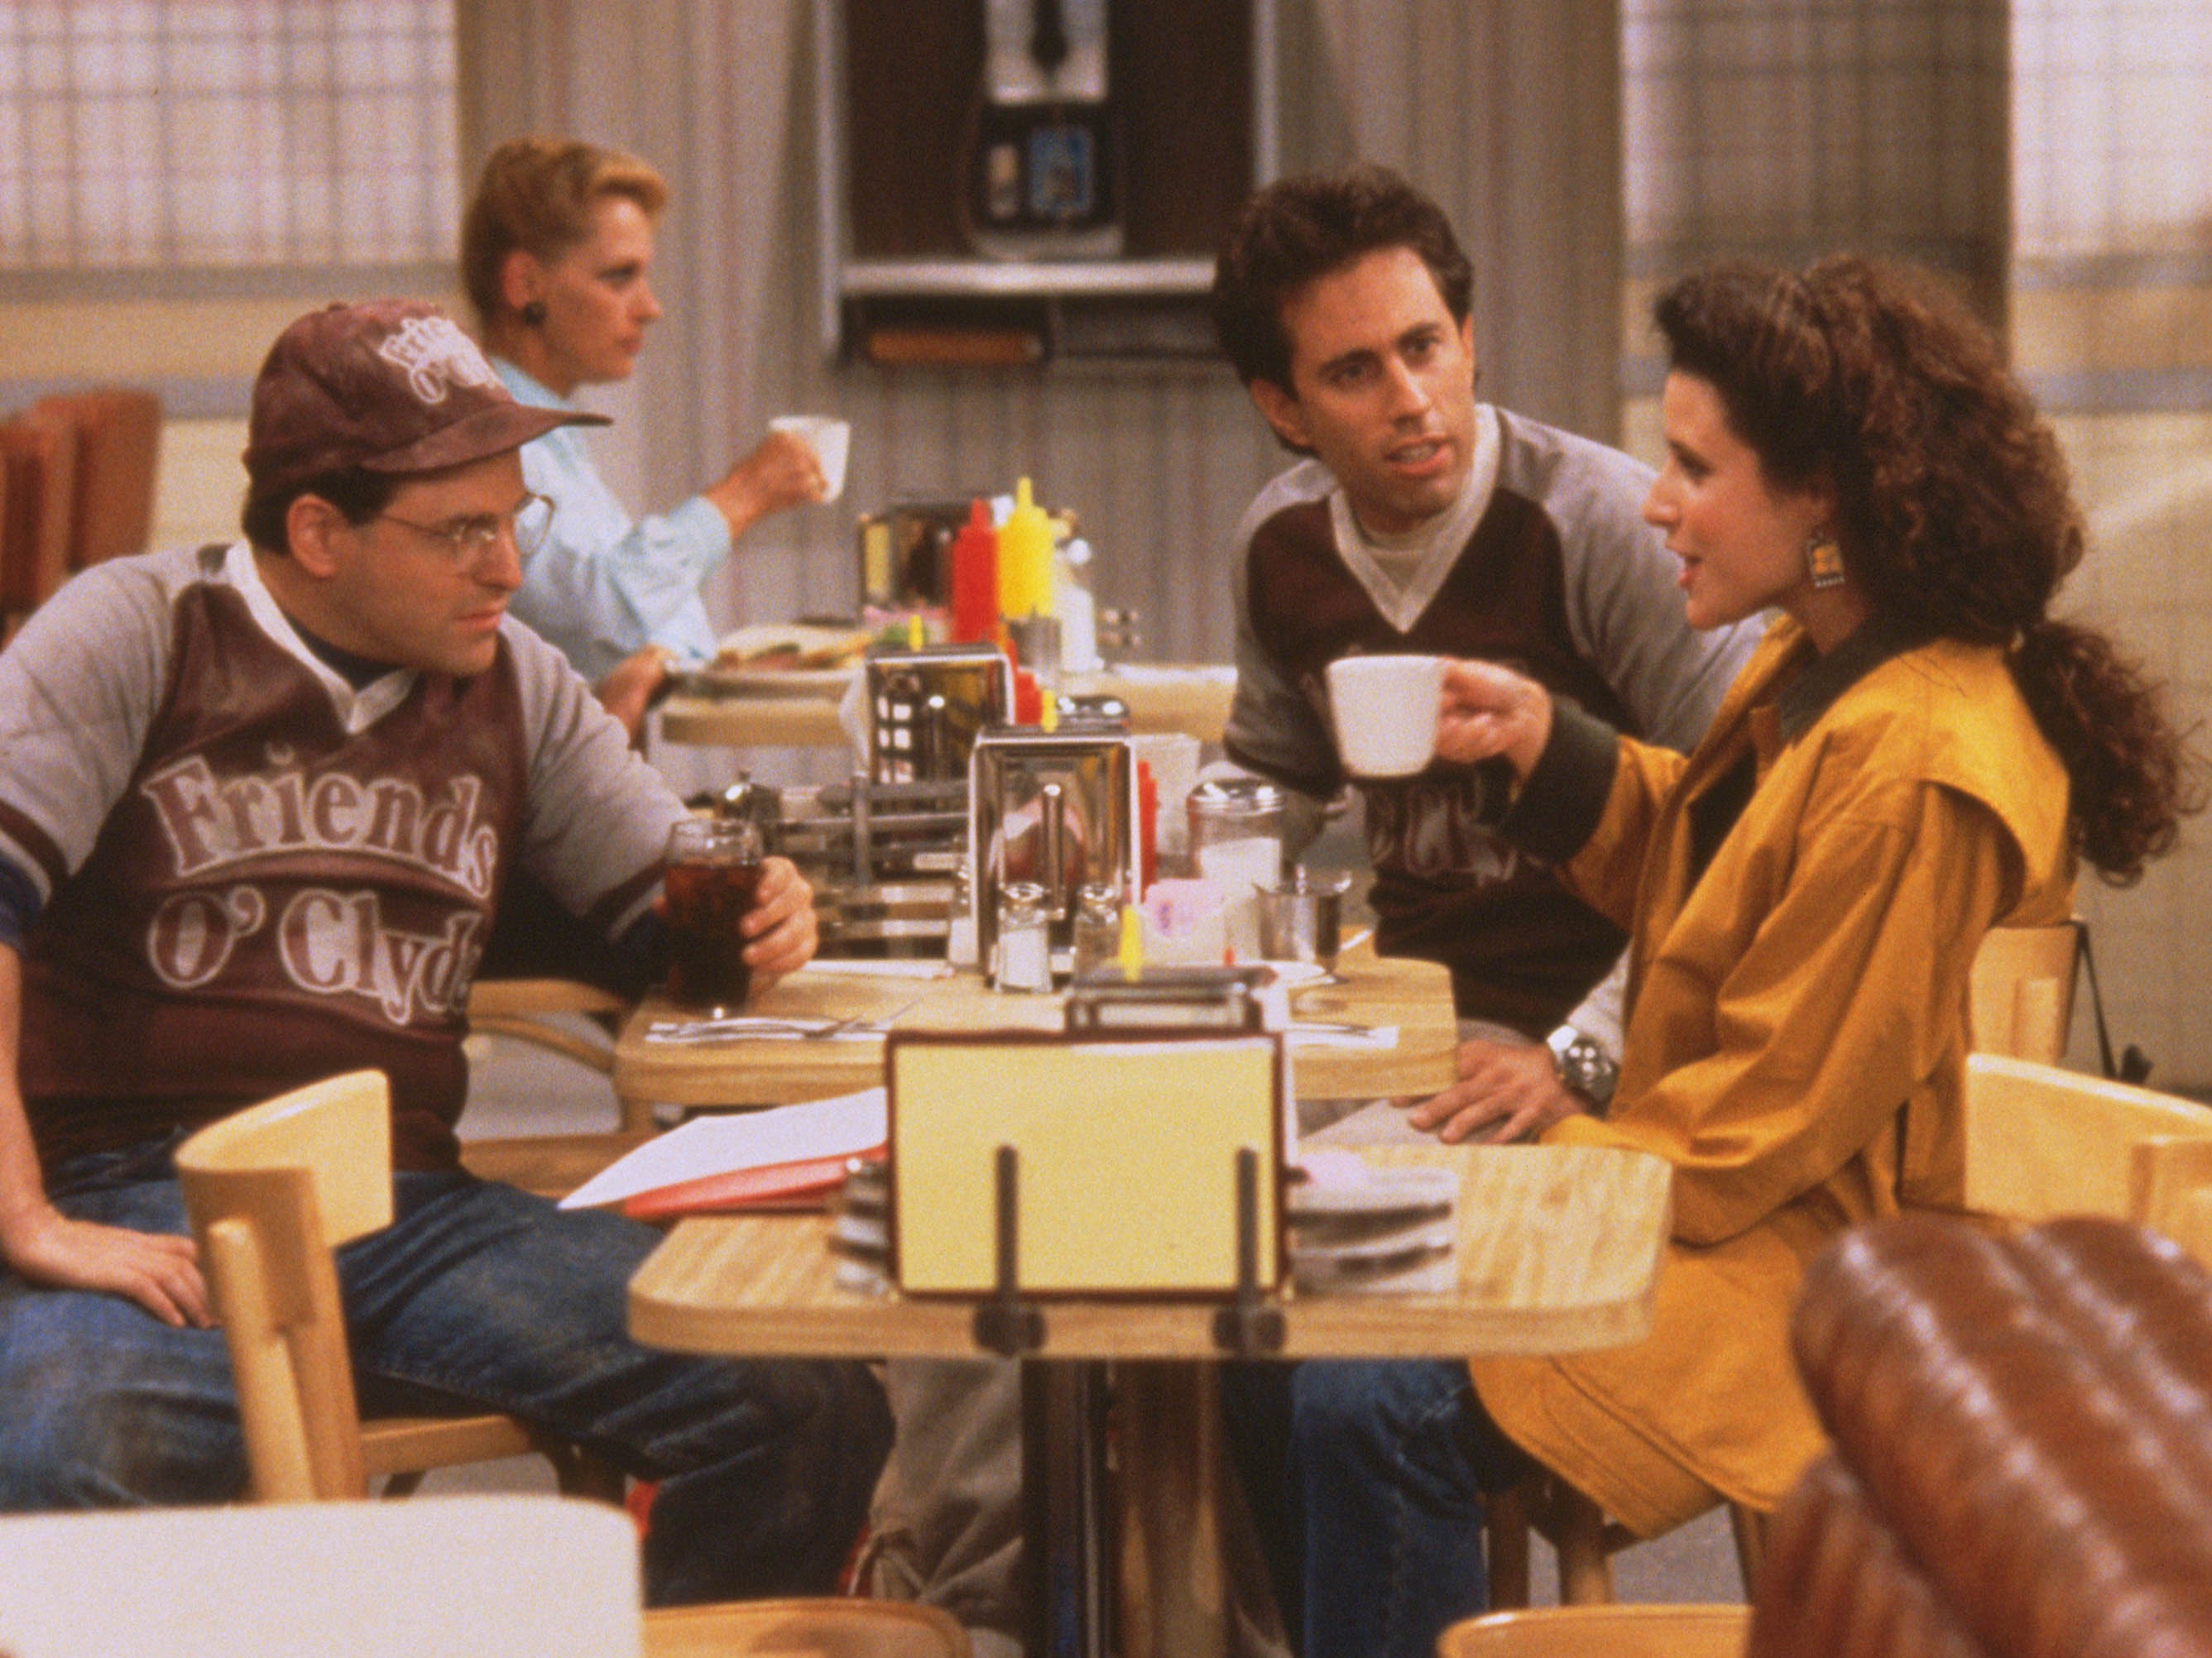 Shooting the breeze: George (Jason Alexander), Jerry (Jerry Seinfeld) and Elaine (Julia Louis-Dreyfus) in one of the show’s many deli-set scenes